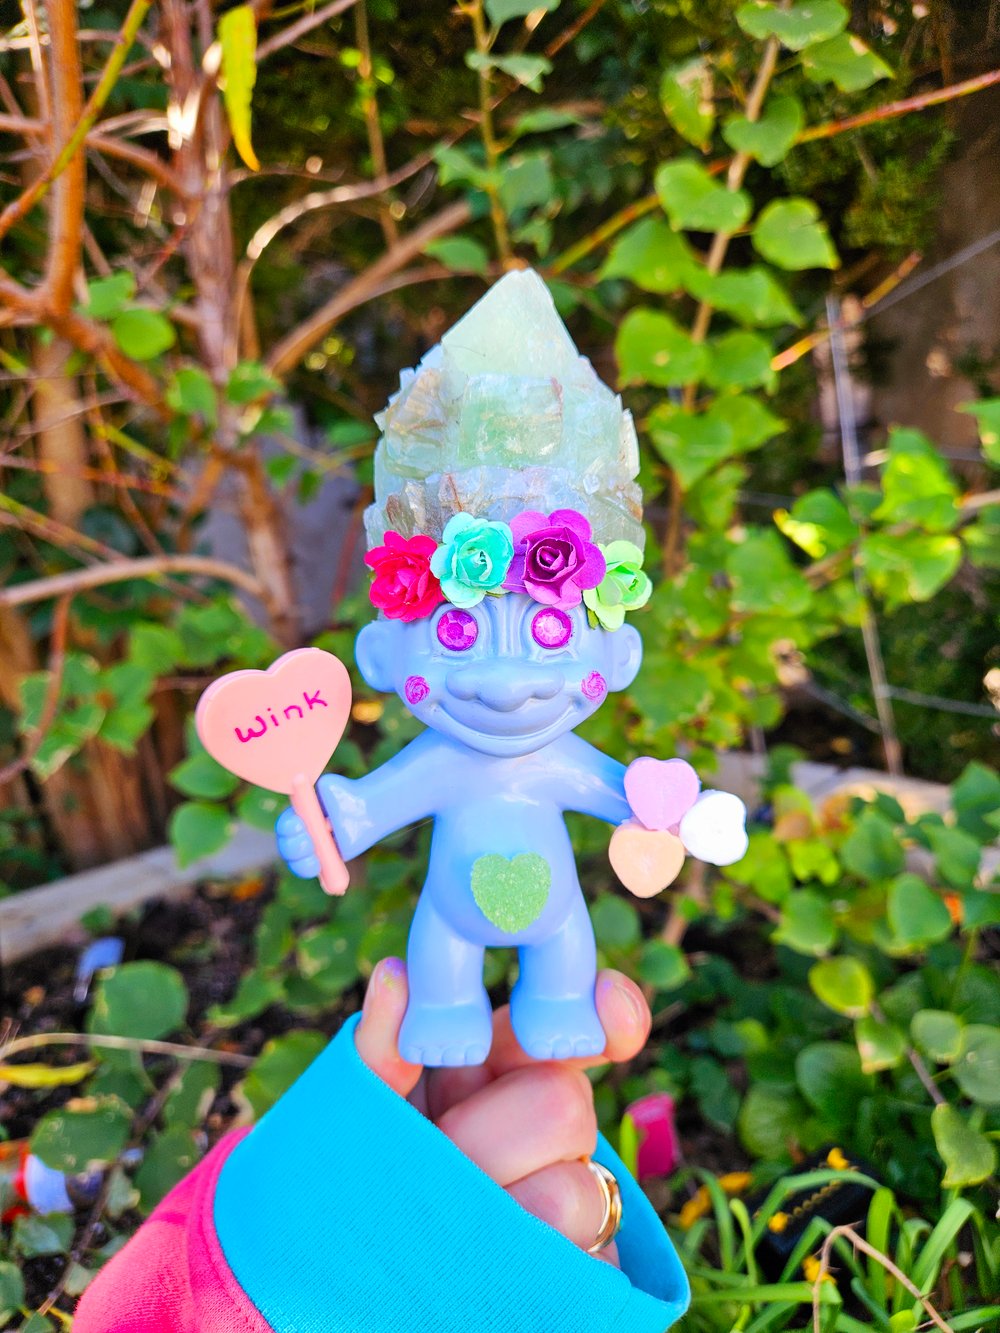 Green Calcite Candy Heart Troll with Pink Personalized Candy Heart MSG 6"